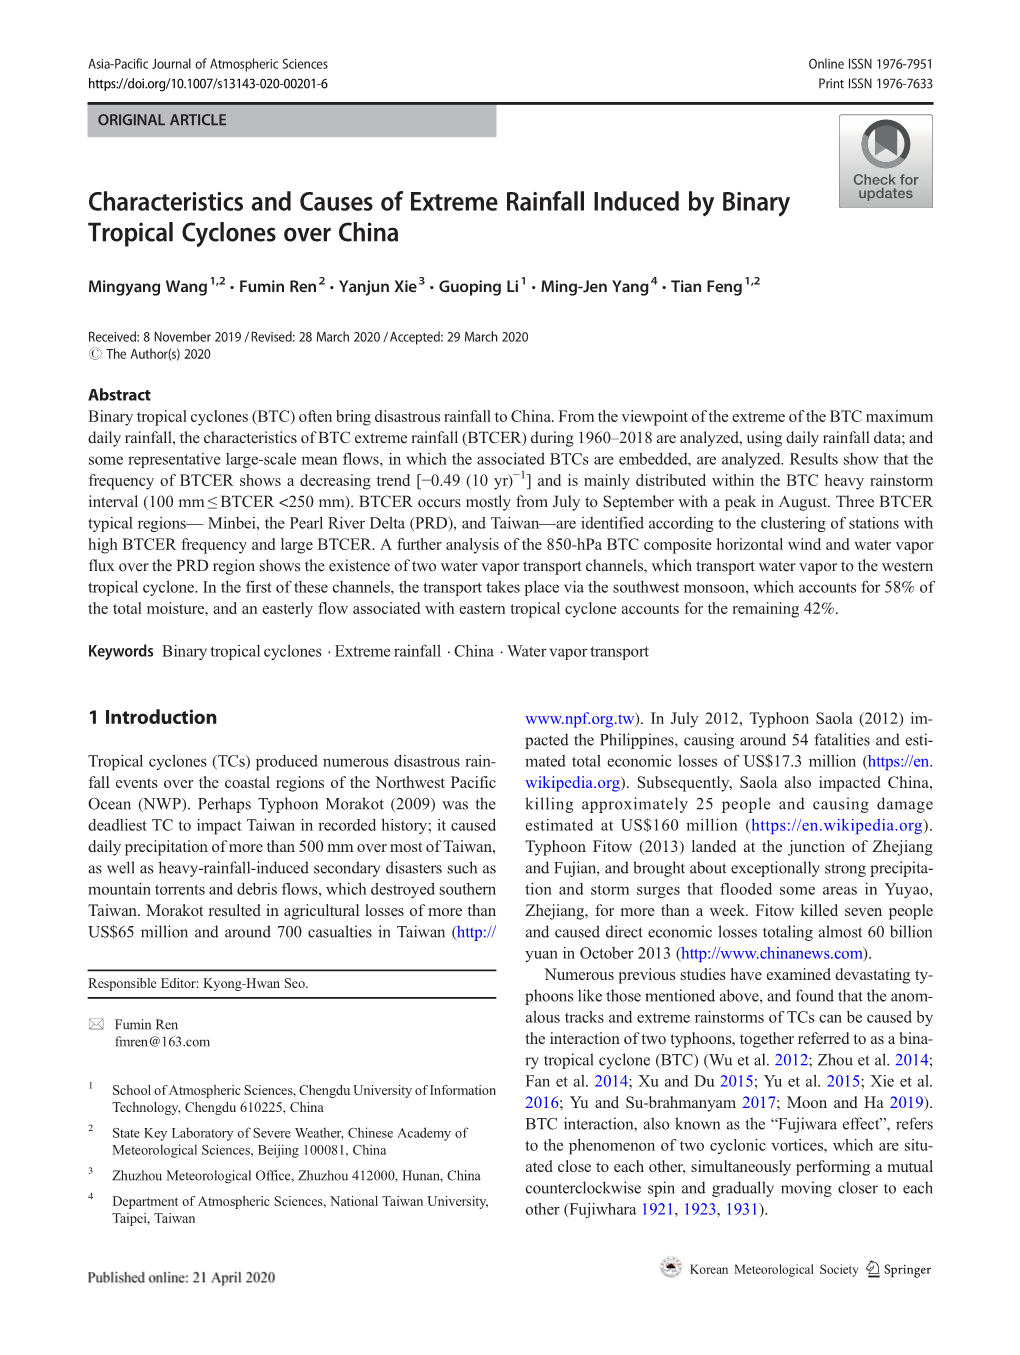 Characteristics and Causes of Extreme Rainfall Induced by Binary Tropical Cyclones Over China